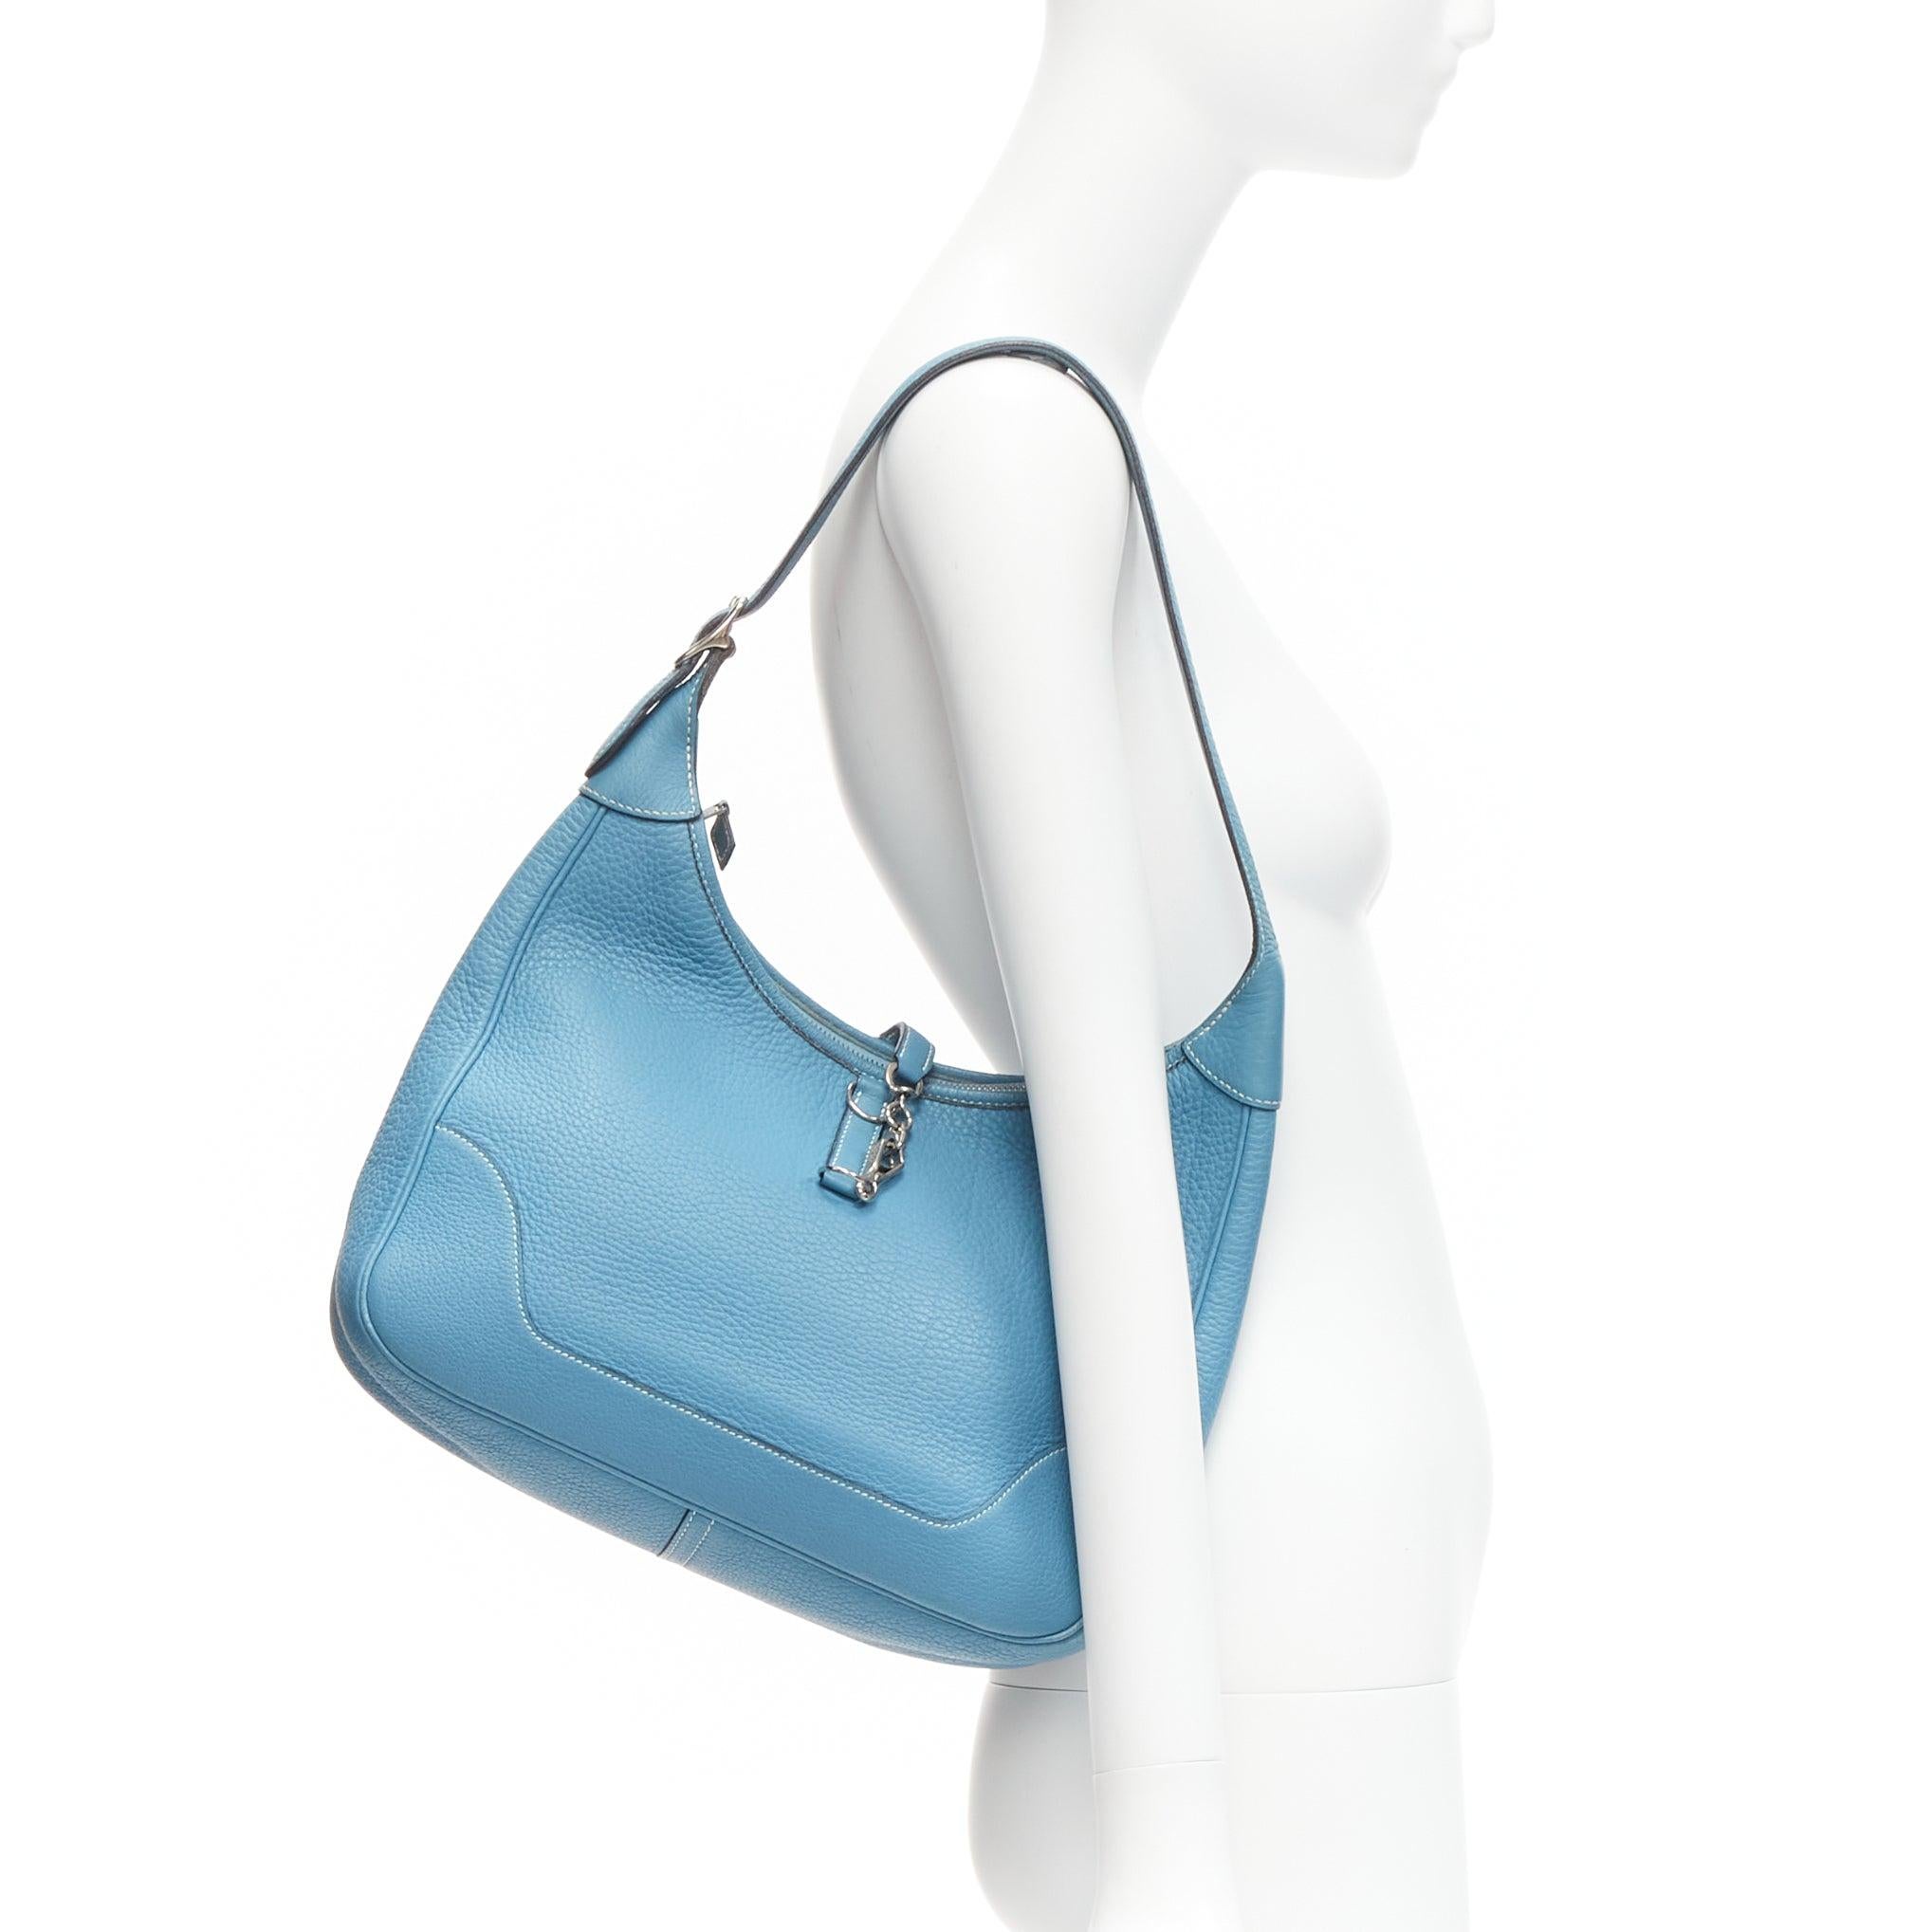 HERMES Trim II 31 Blue Jean Clemence togo leather lobster clasp hobo shoulder bag
Reference: GIYG/A00290
Brand: Hermes
Model: Trim II 31
Material: Leather
Color: Blue
Pattern: Solid
Closure: Zip
Lining: Blue Leather
Extra Details: Zip closure and